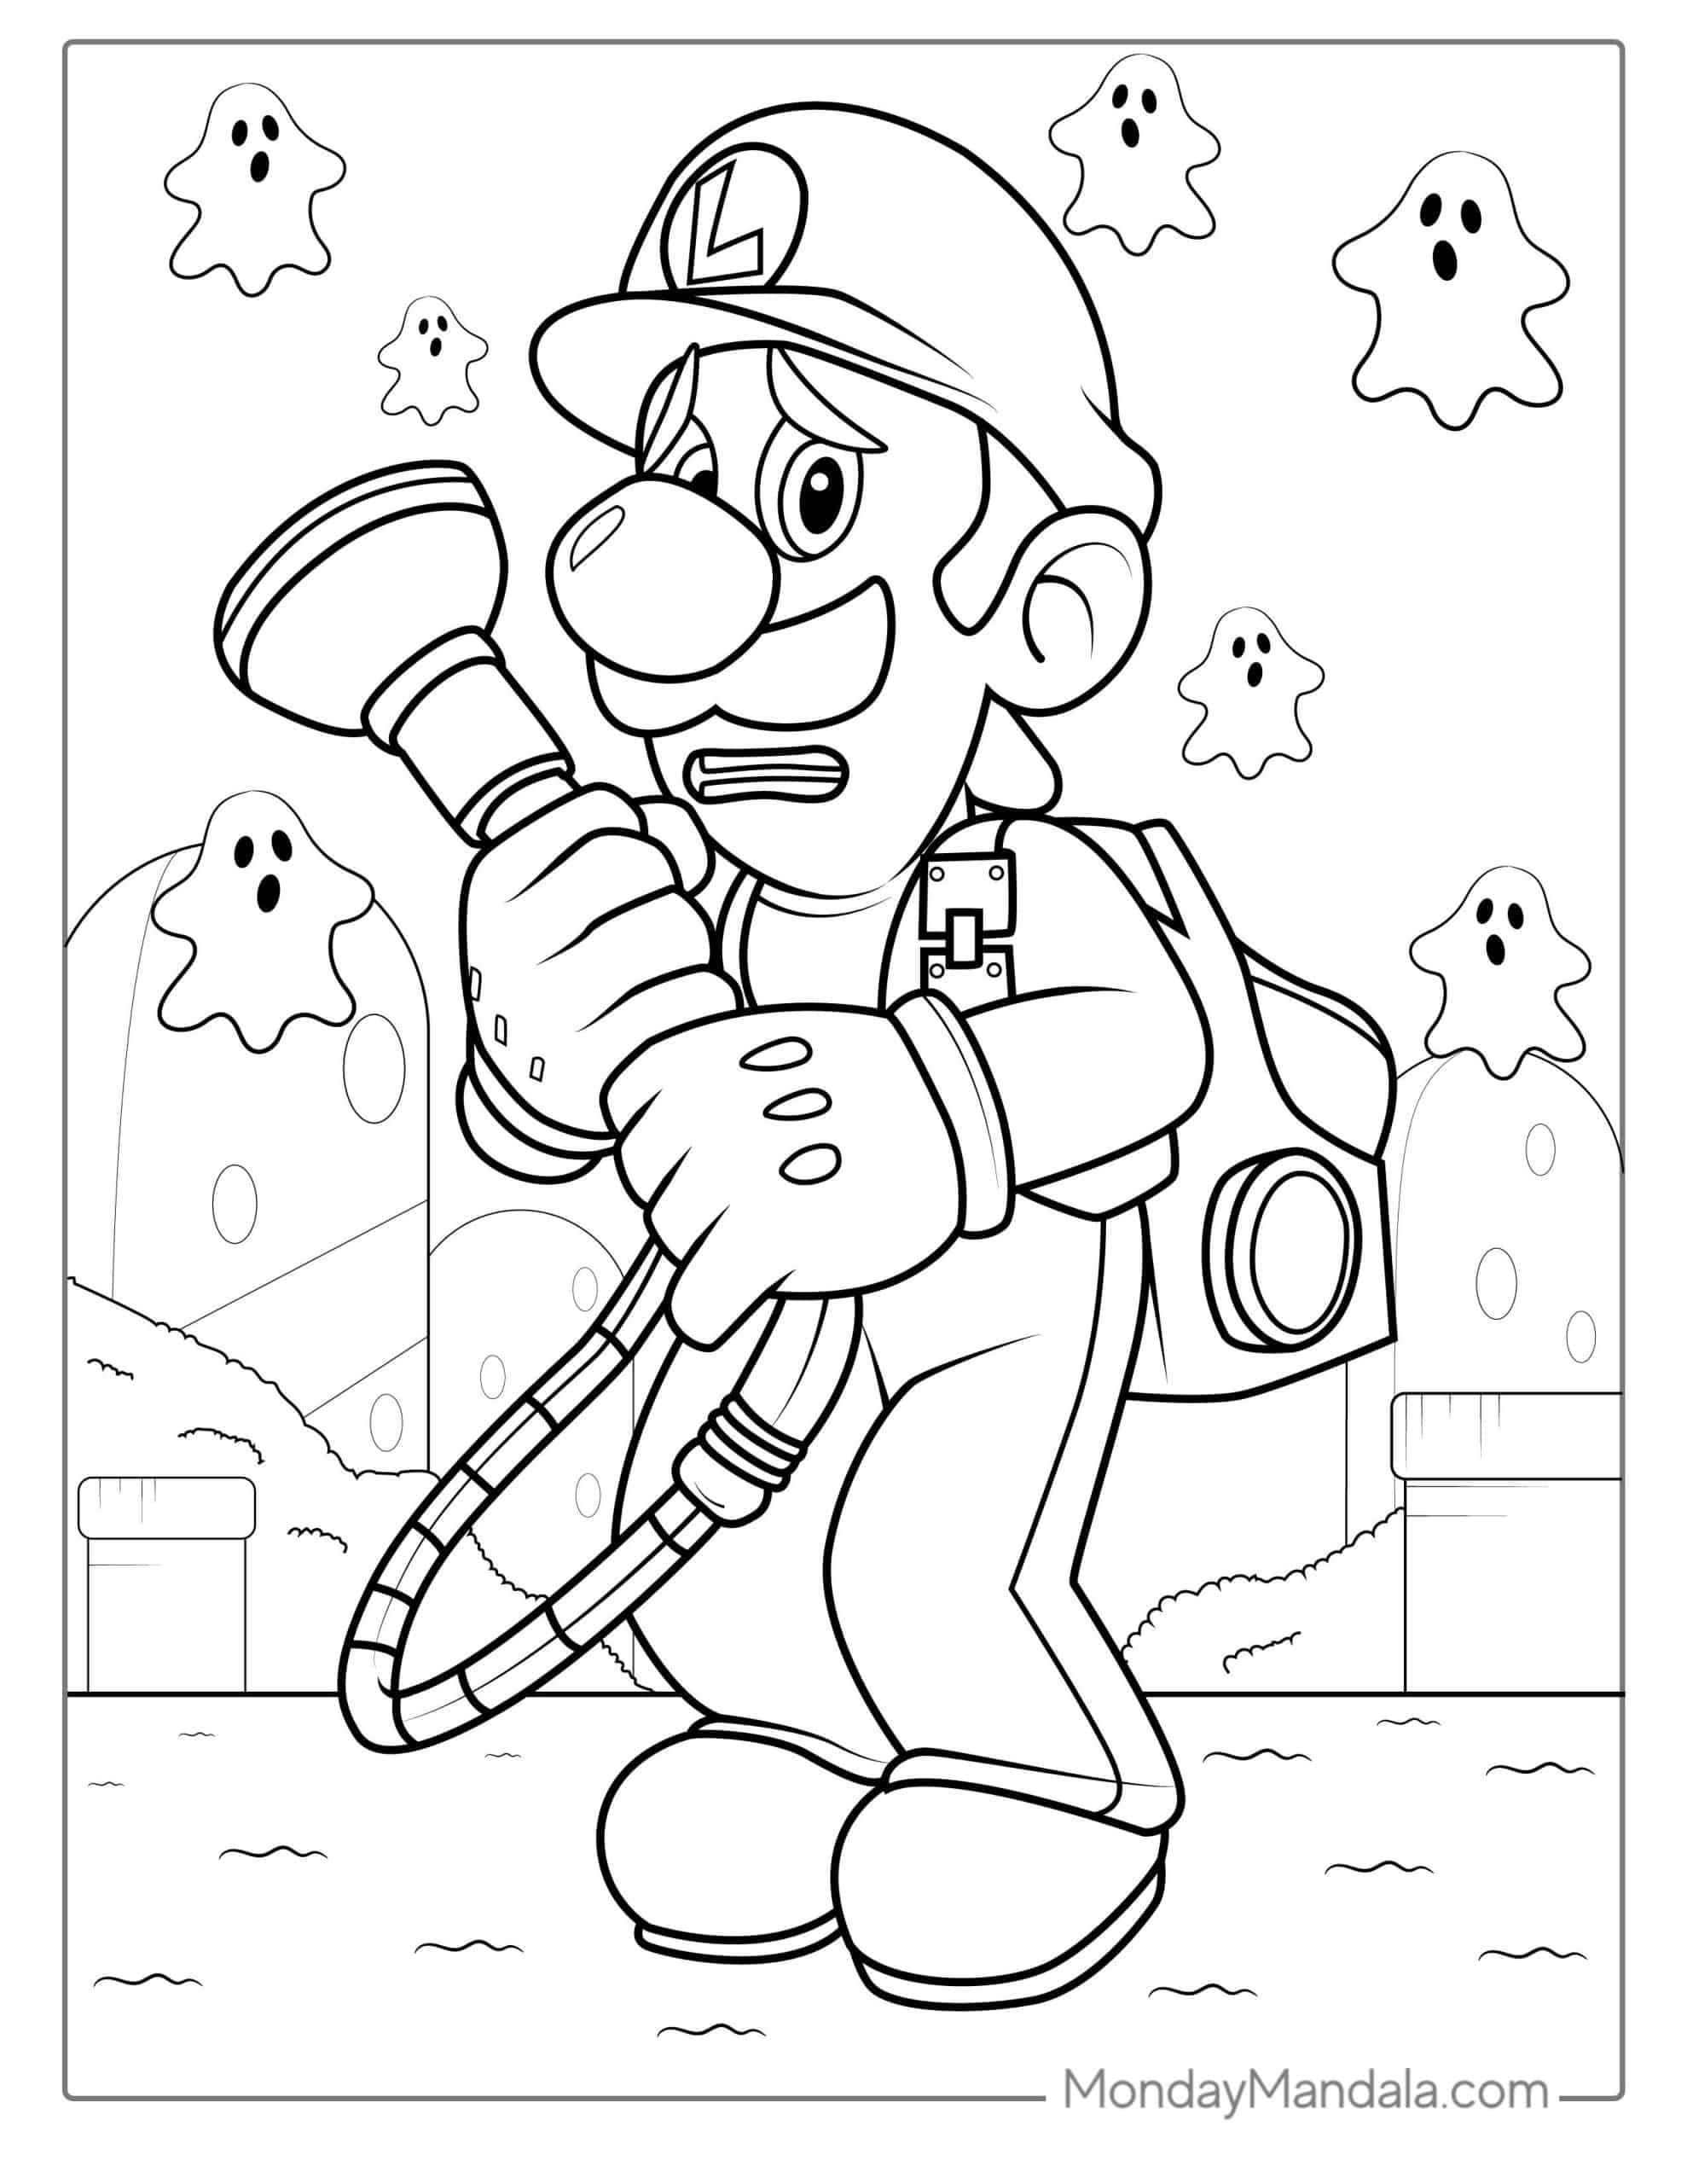 Cute luigi coloring pages free pdf printables coloring pages stitch coloring pages mario coloring pages